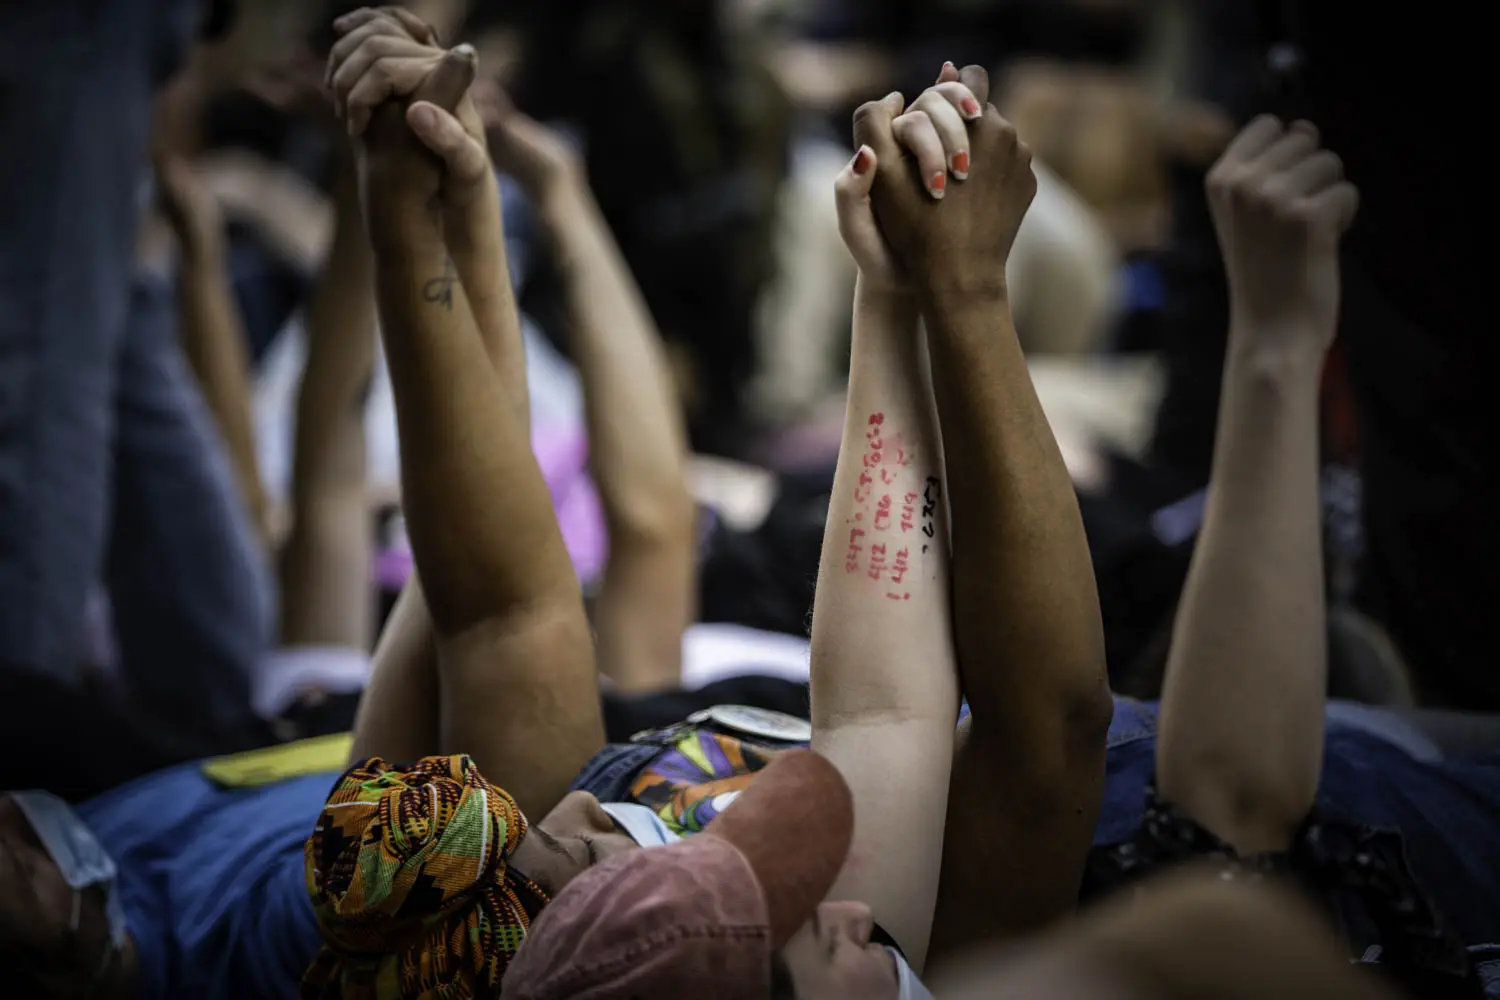 People raise joined hands during a protest.